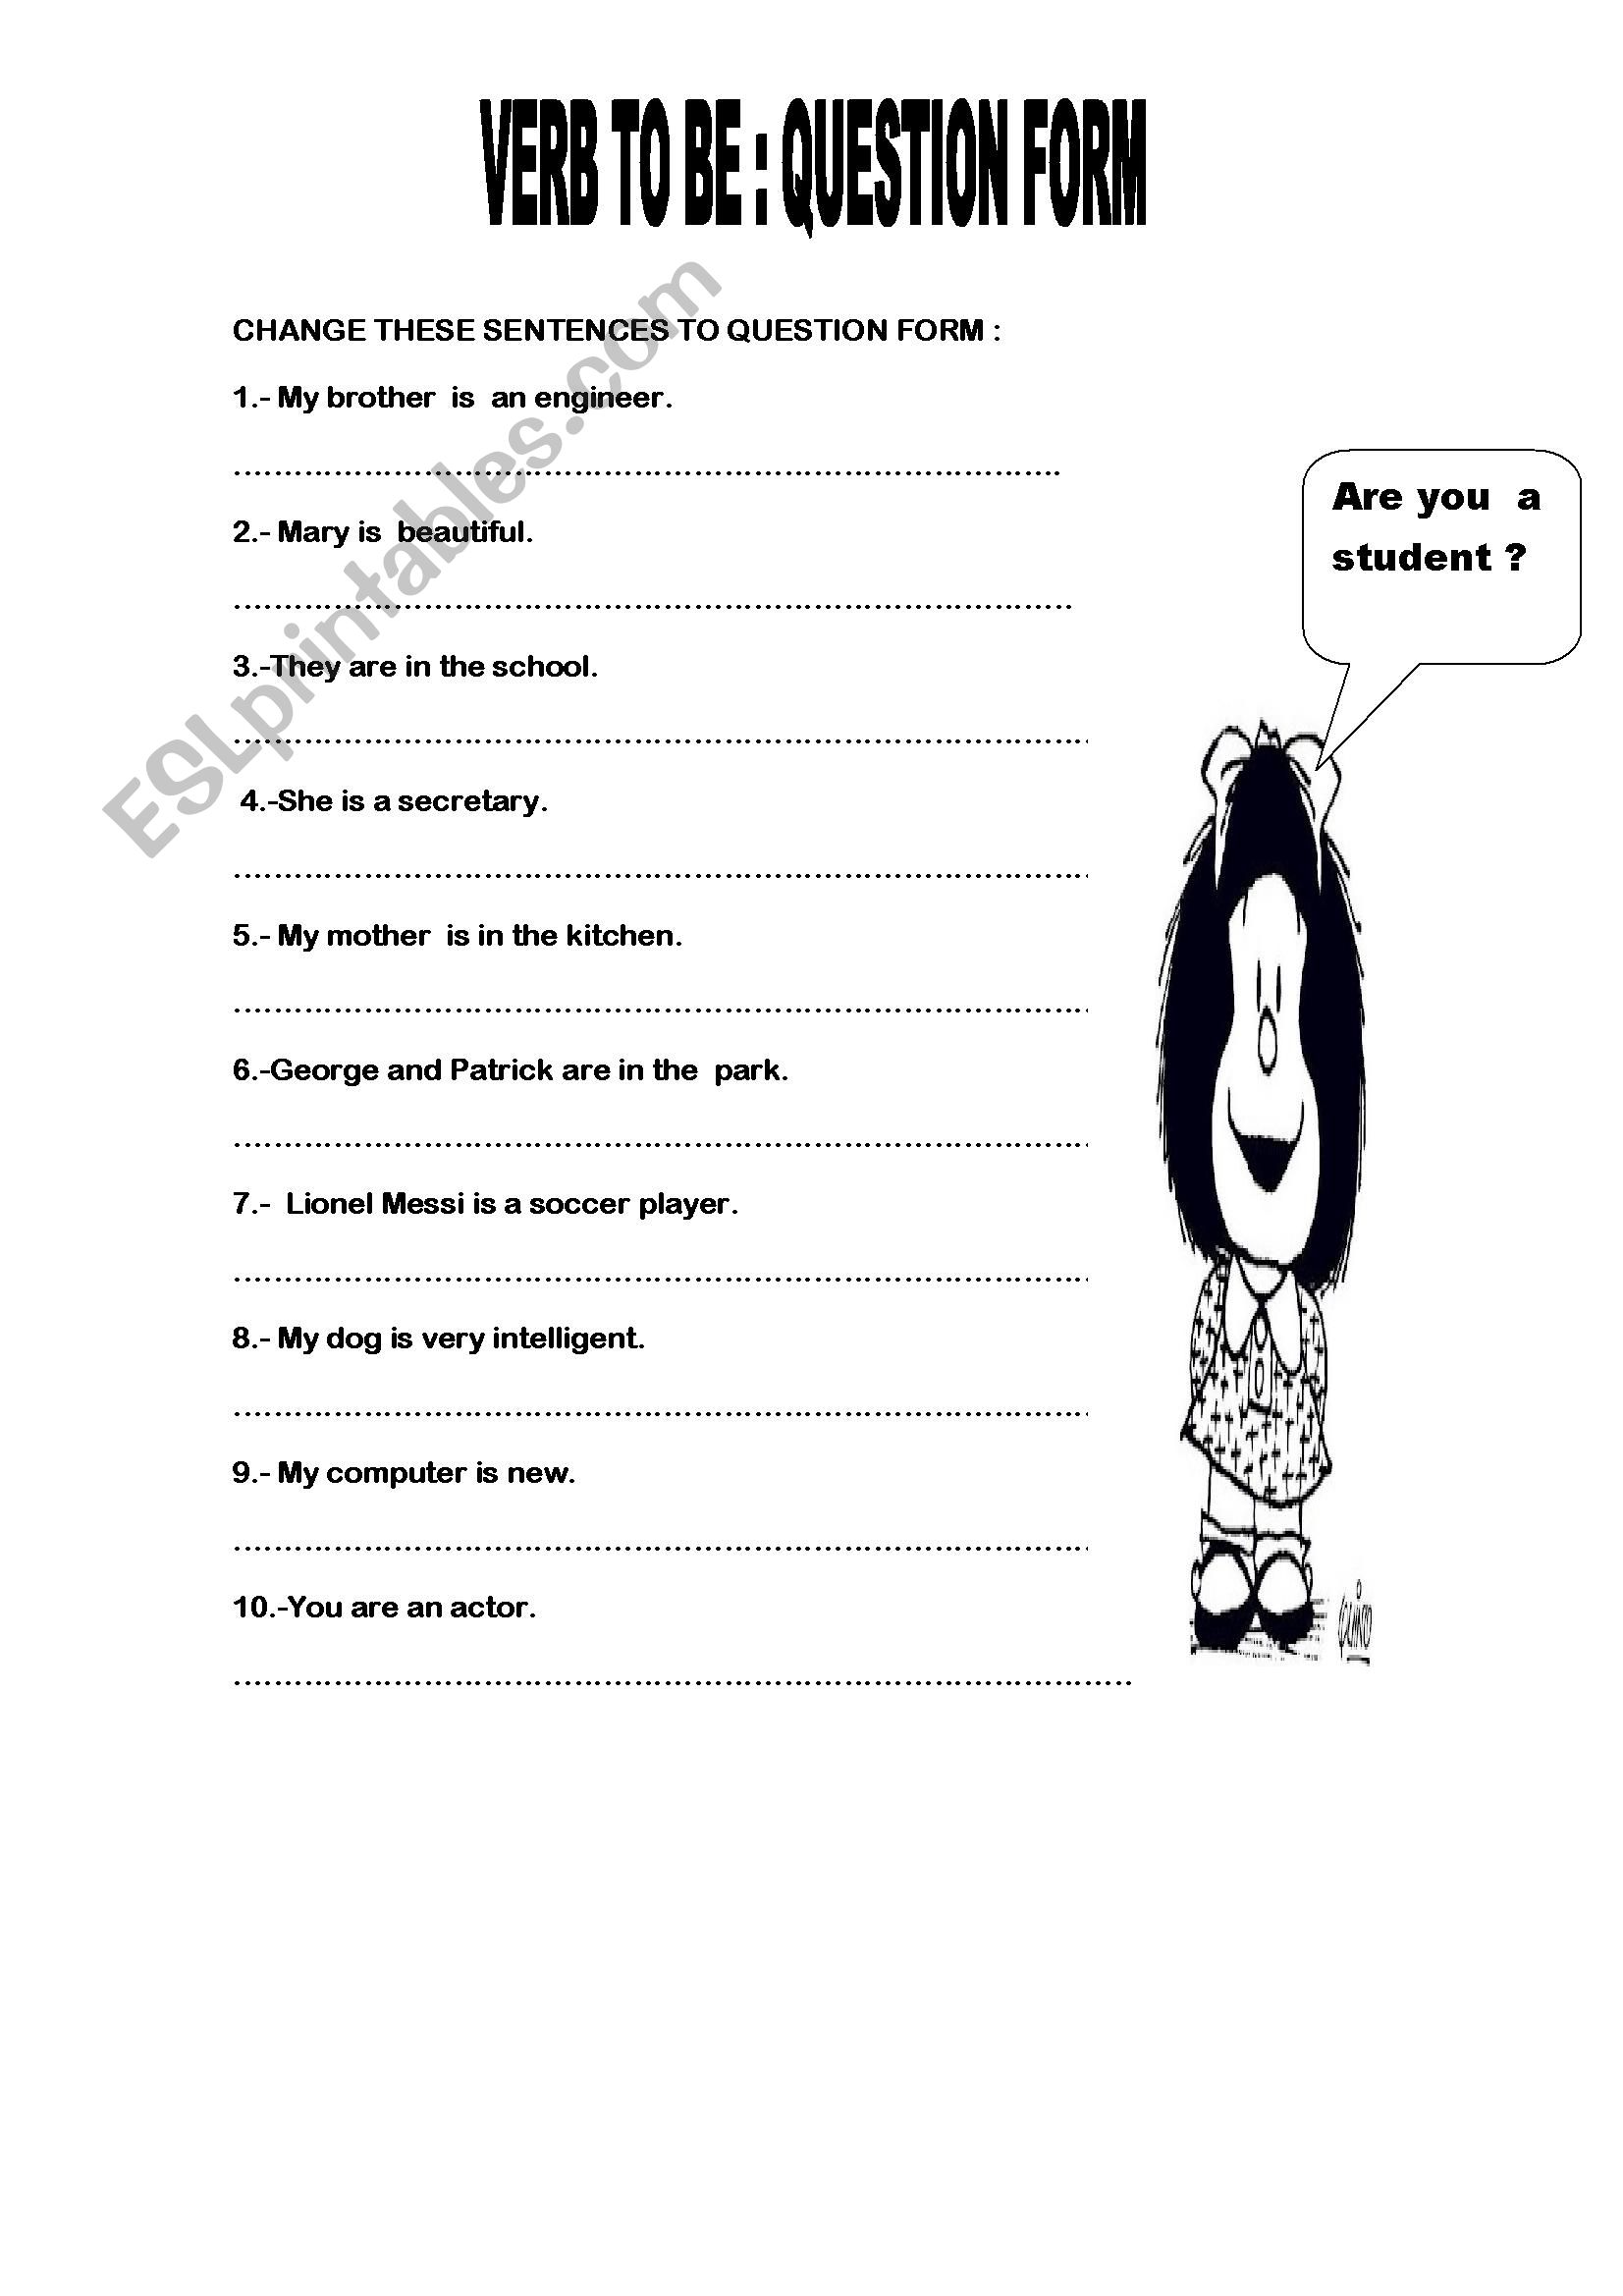 verb-to-be-writing-questions-esl-worksheet-by-monica-br